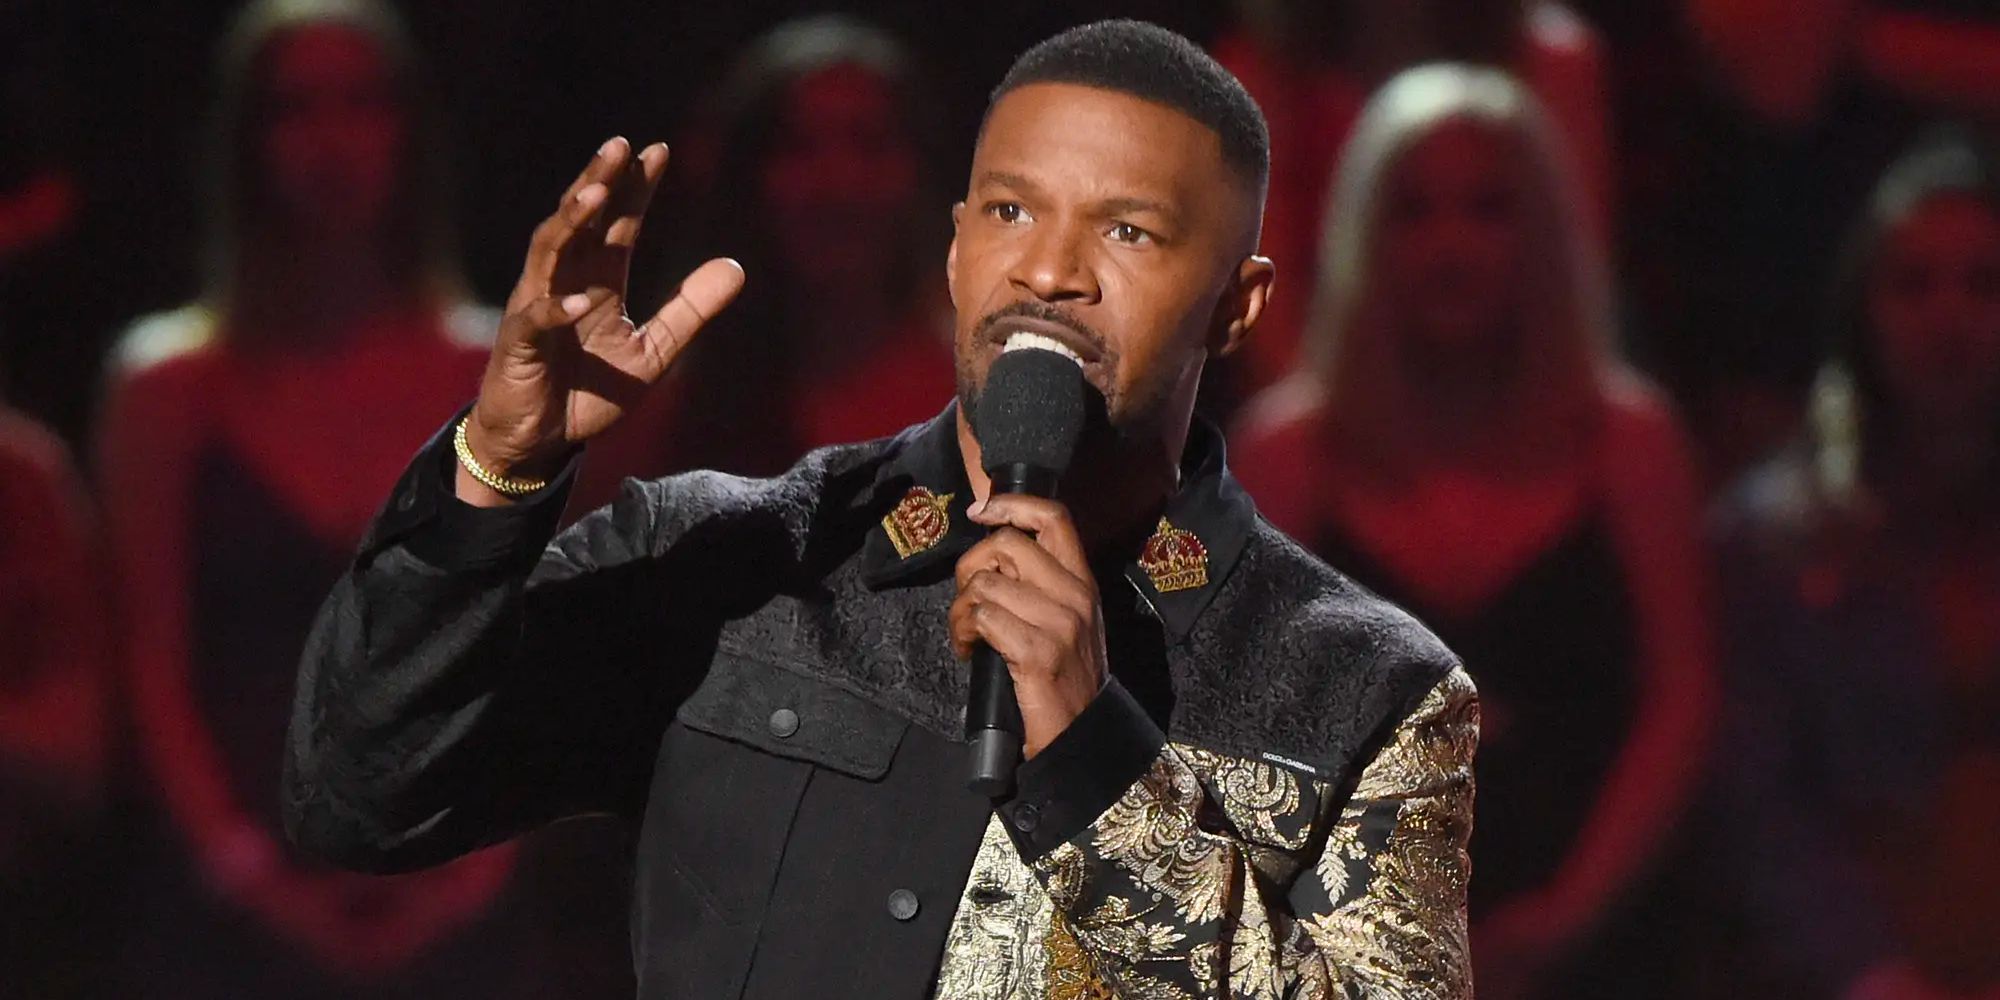 Jamie Foxx performs stand-up comedy.